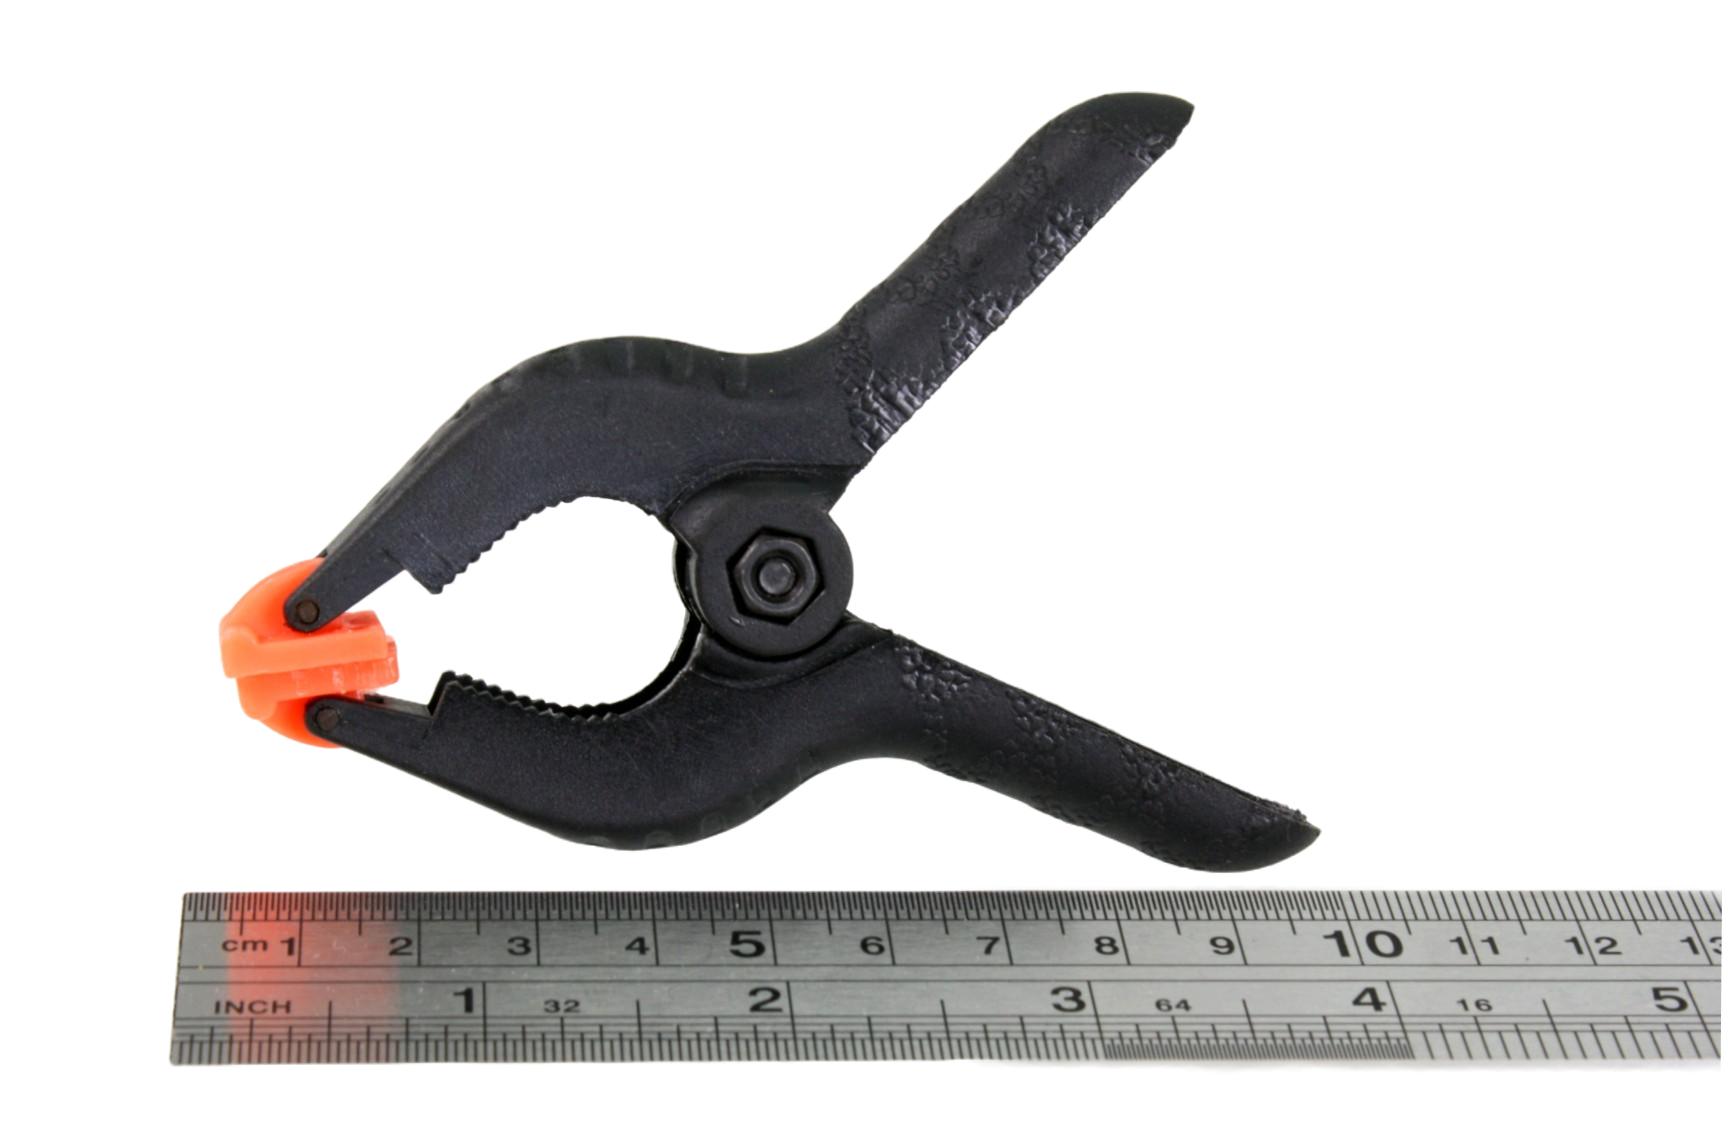 25mm spring clamp, next to a ruler, showing the total length to be just under 10cm